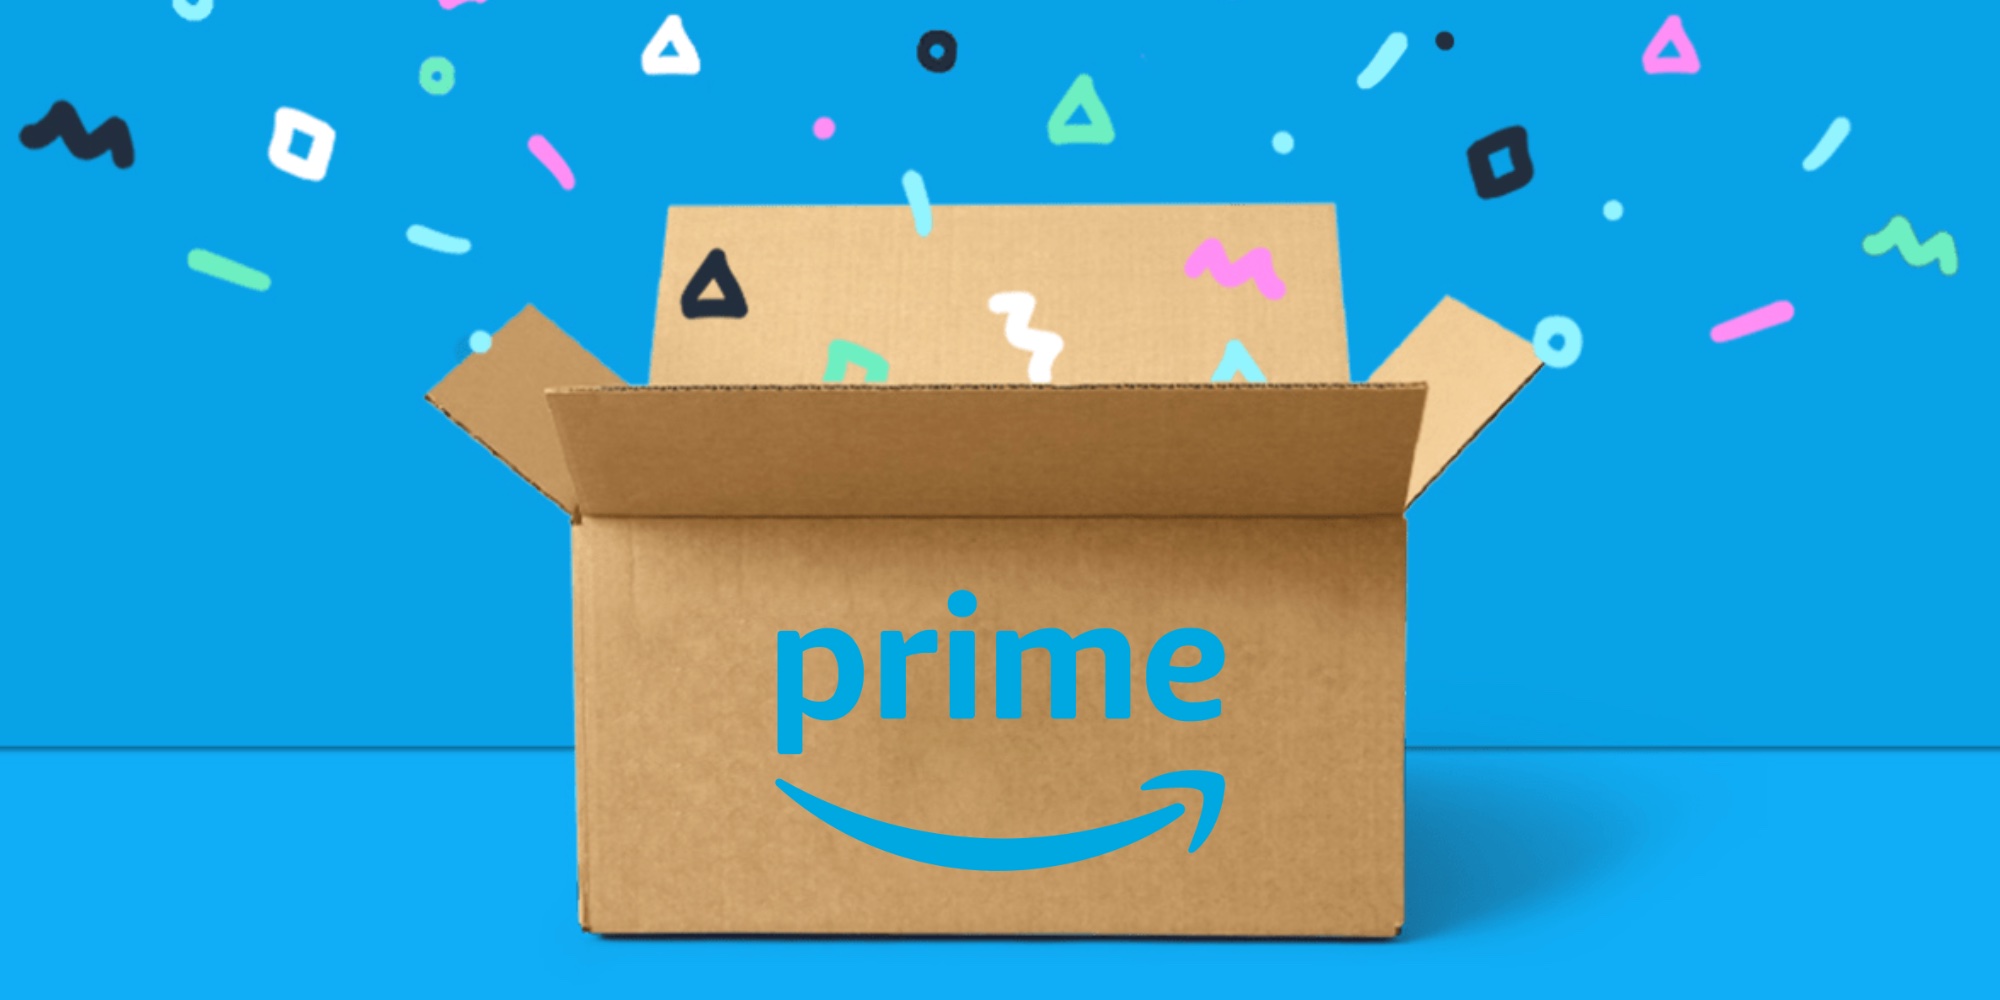 DataWeave -  US Prime Day 2023: Insights on Pricing and